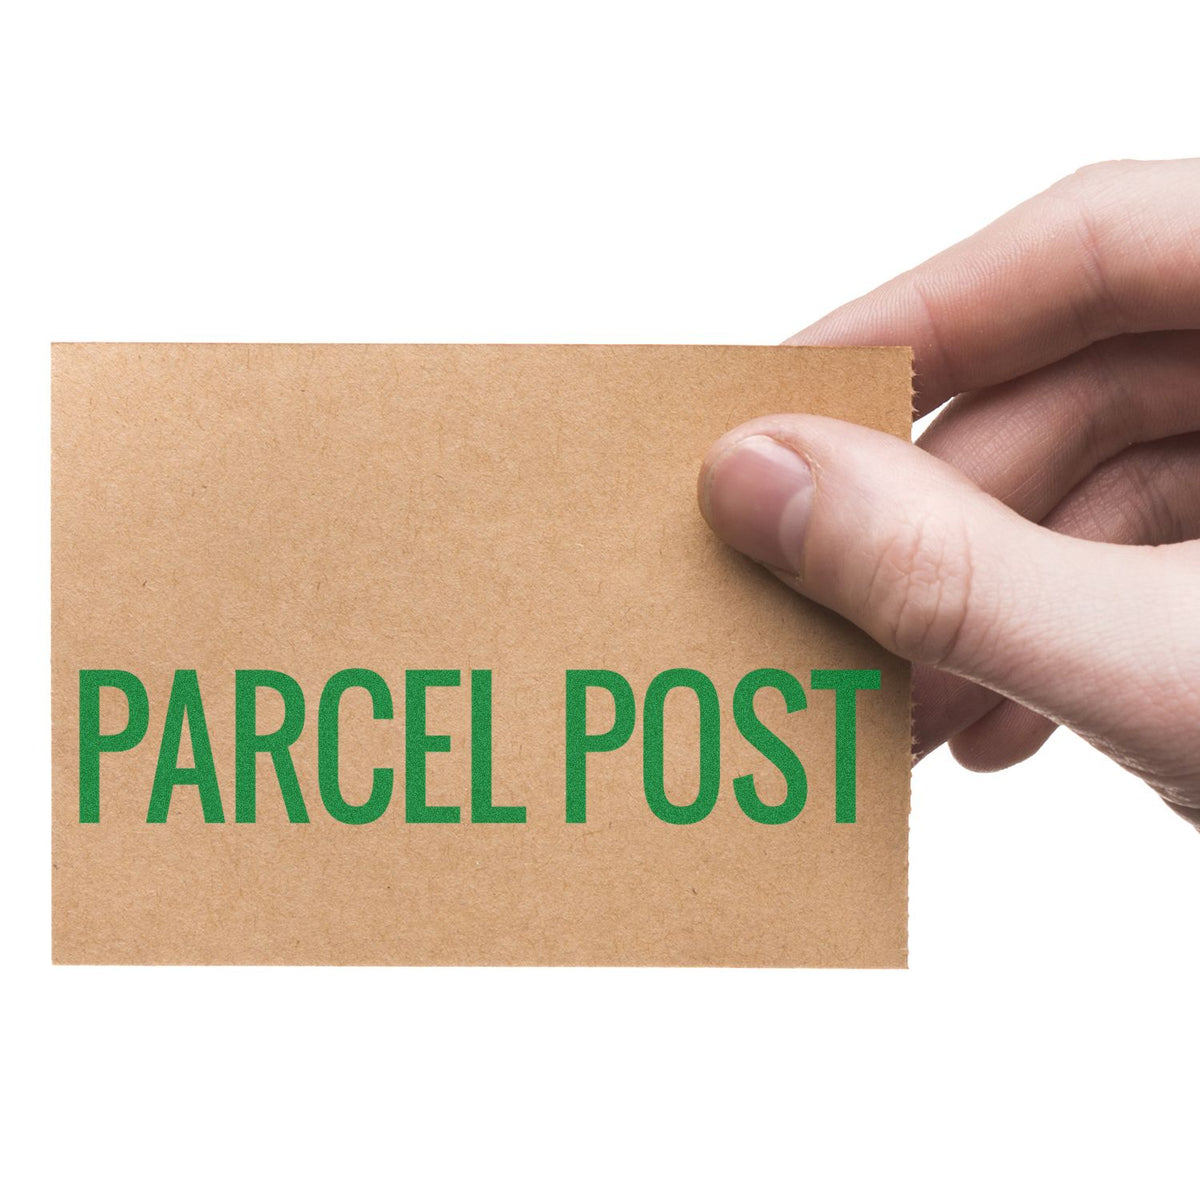 Parcel Post Rubber Stamp In Use